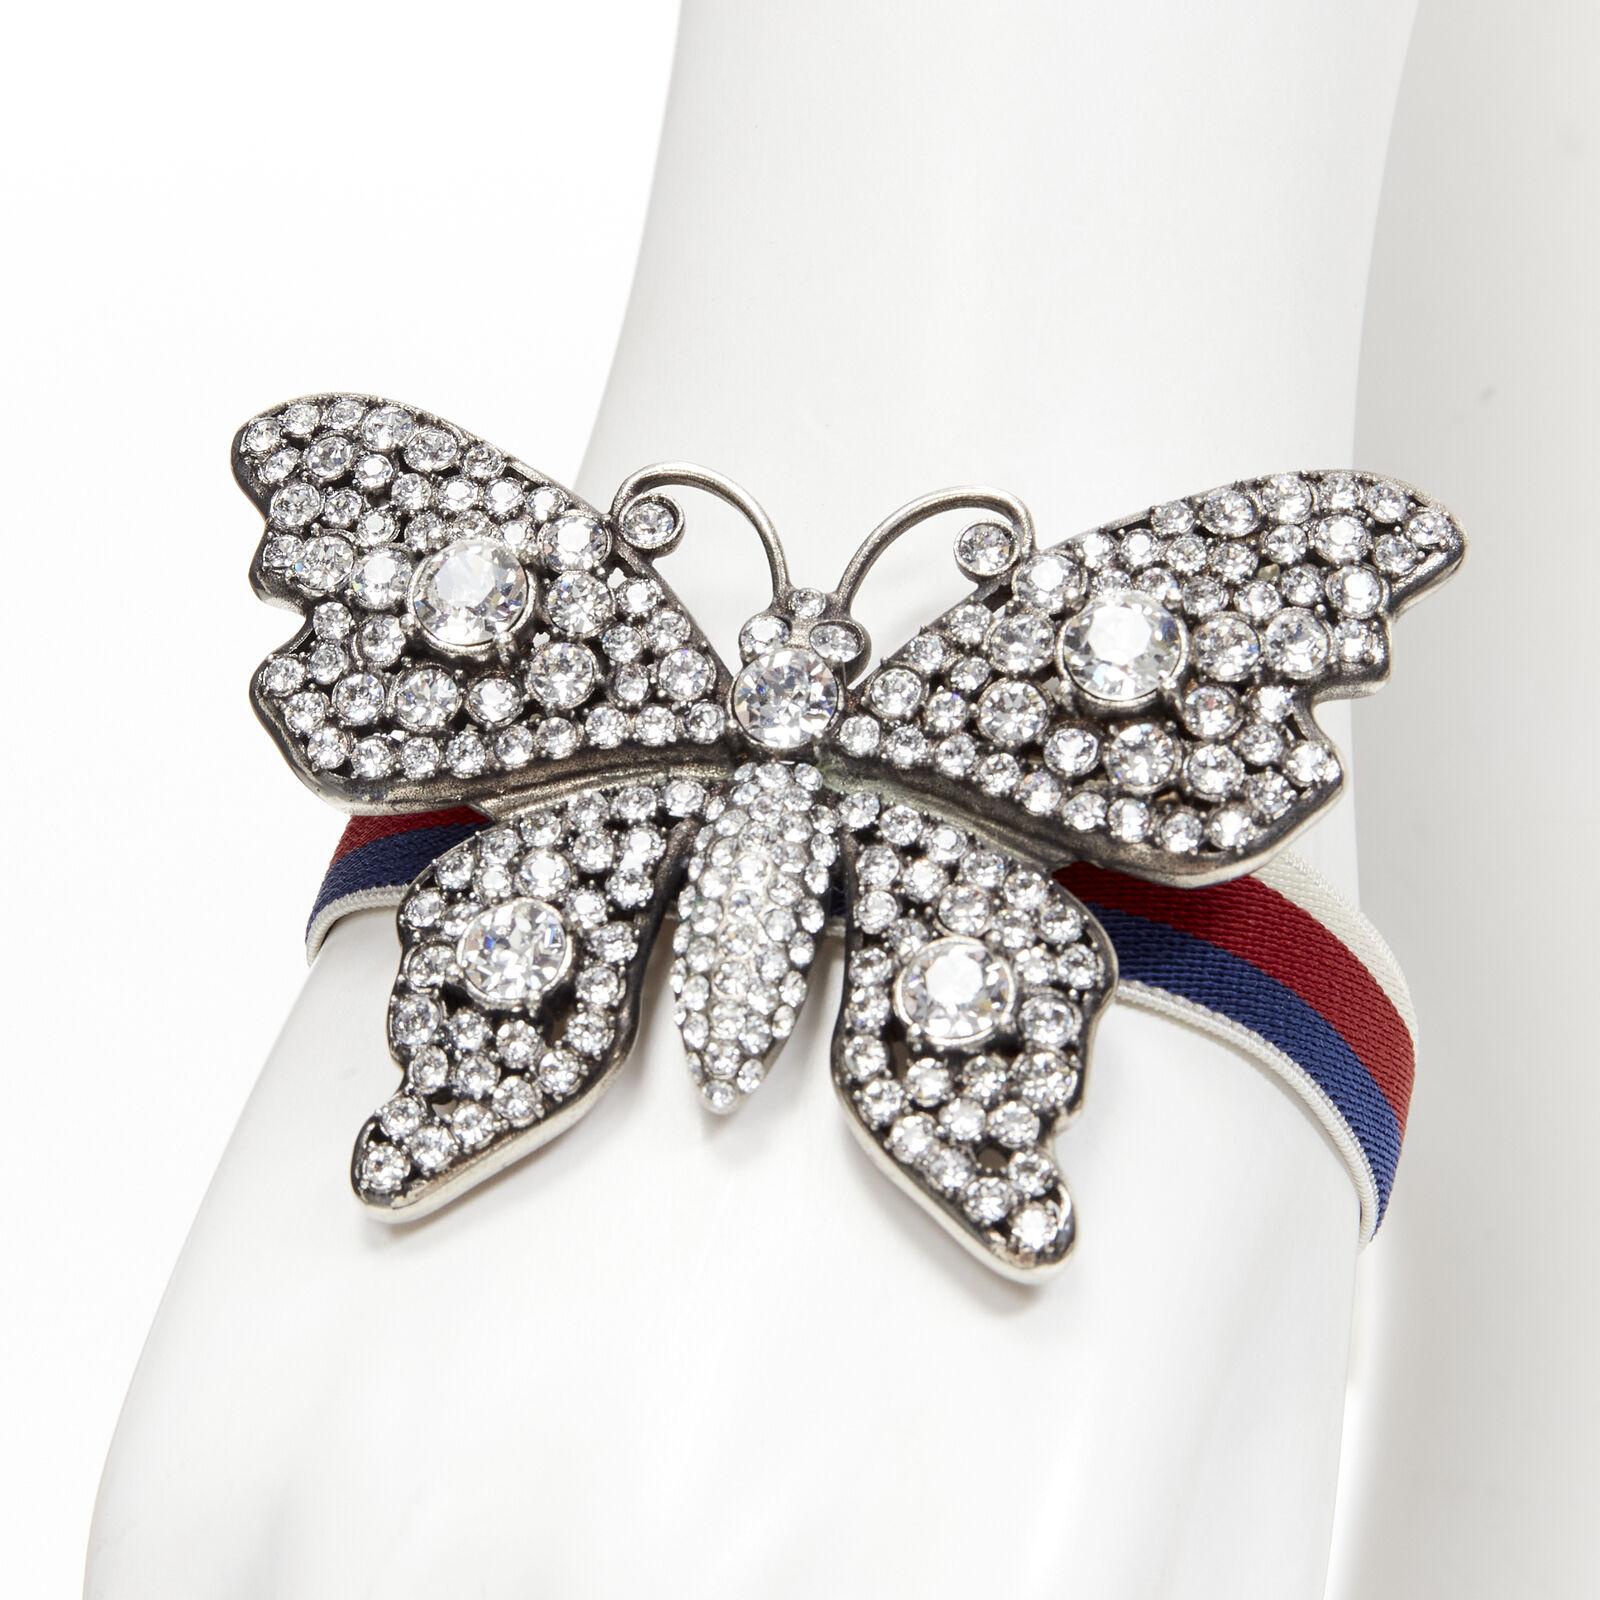 new GUCCI ALESSANDRO MICHELE antique silver crystal Butterfly web strap bracelet
Reference: TGAS/C01647
Brand: Gucci
Designer: Alessandro Michele
Model: 504656 I3N78 8518
Material: Metal, Fabric
Color: Silver
Pattern: Solid
Closure: Stretchy
Extra